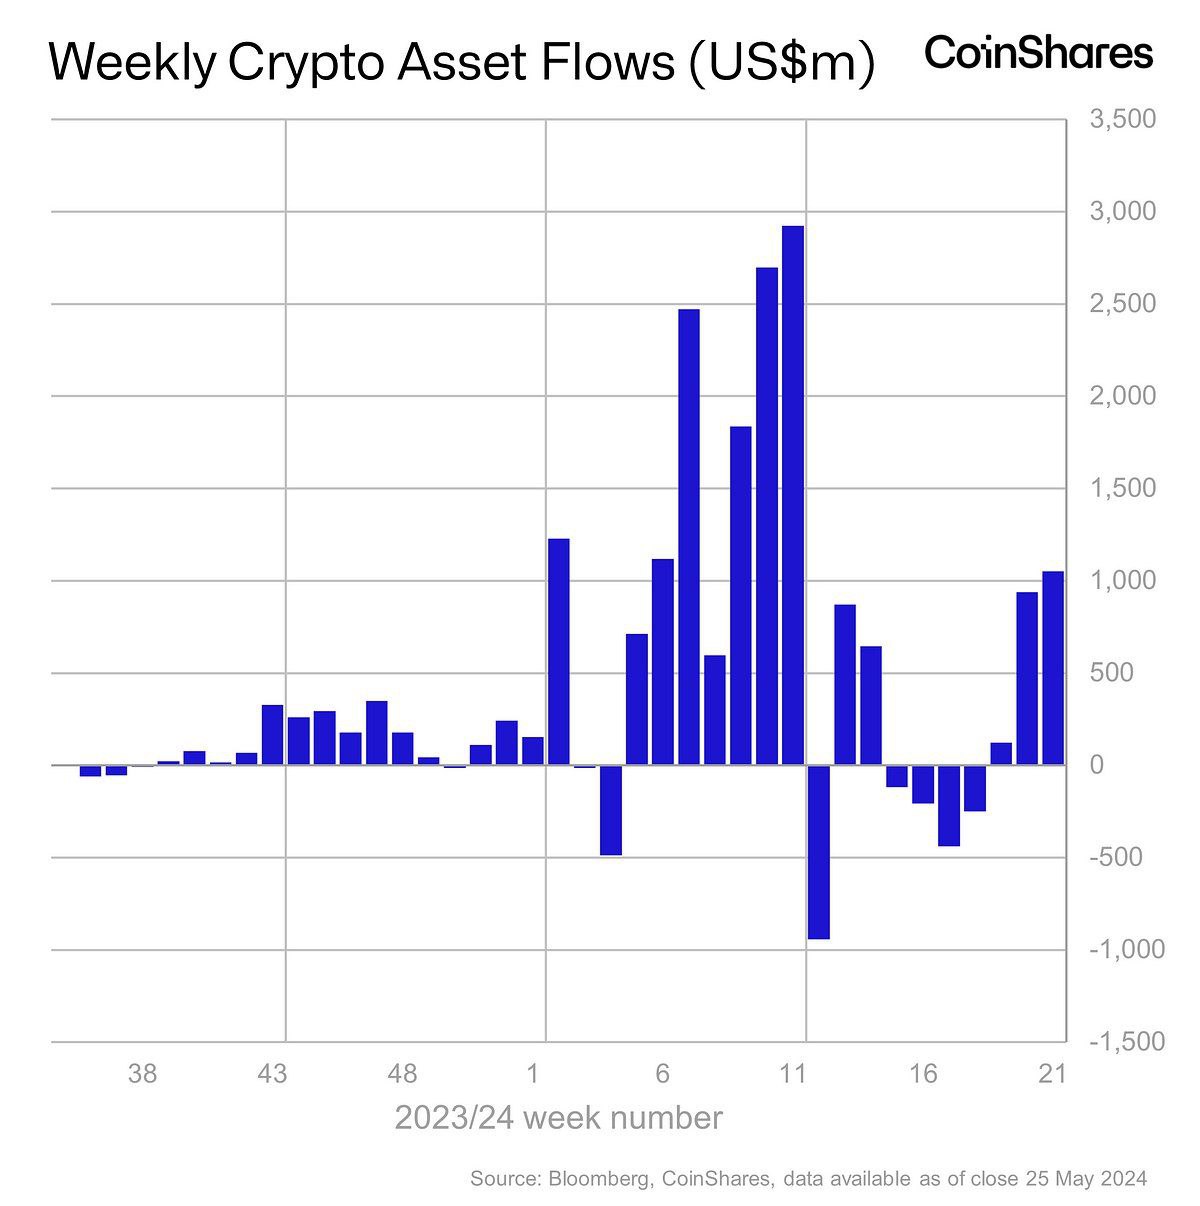 Weekly Crypto Asset Flows